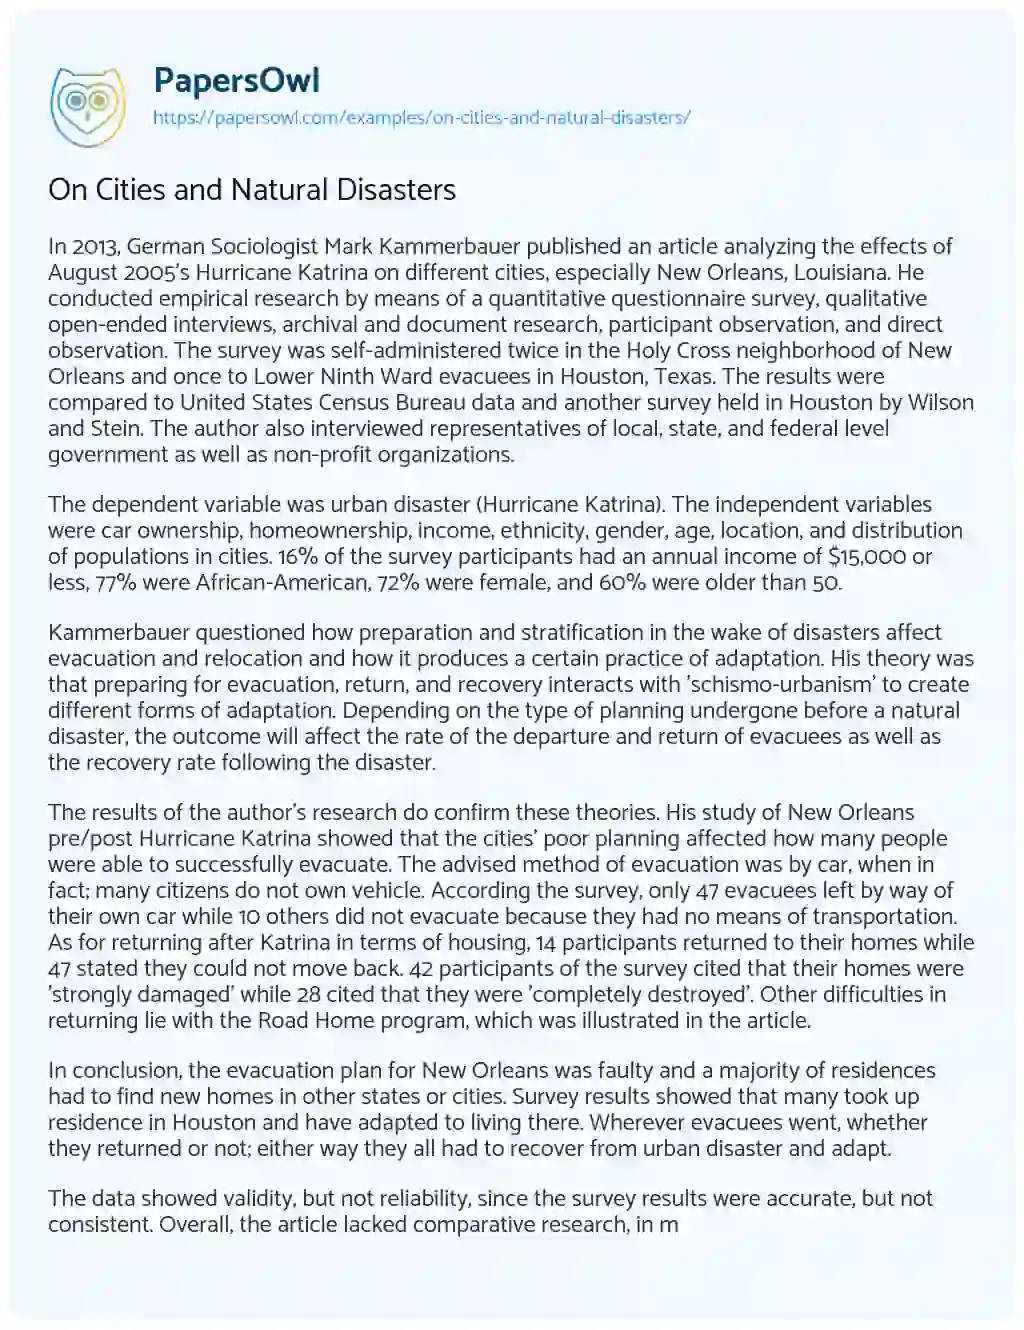 Essay on On Cities and Natural Disasters